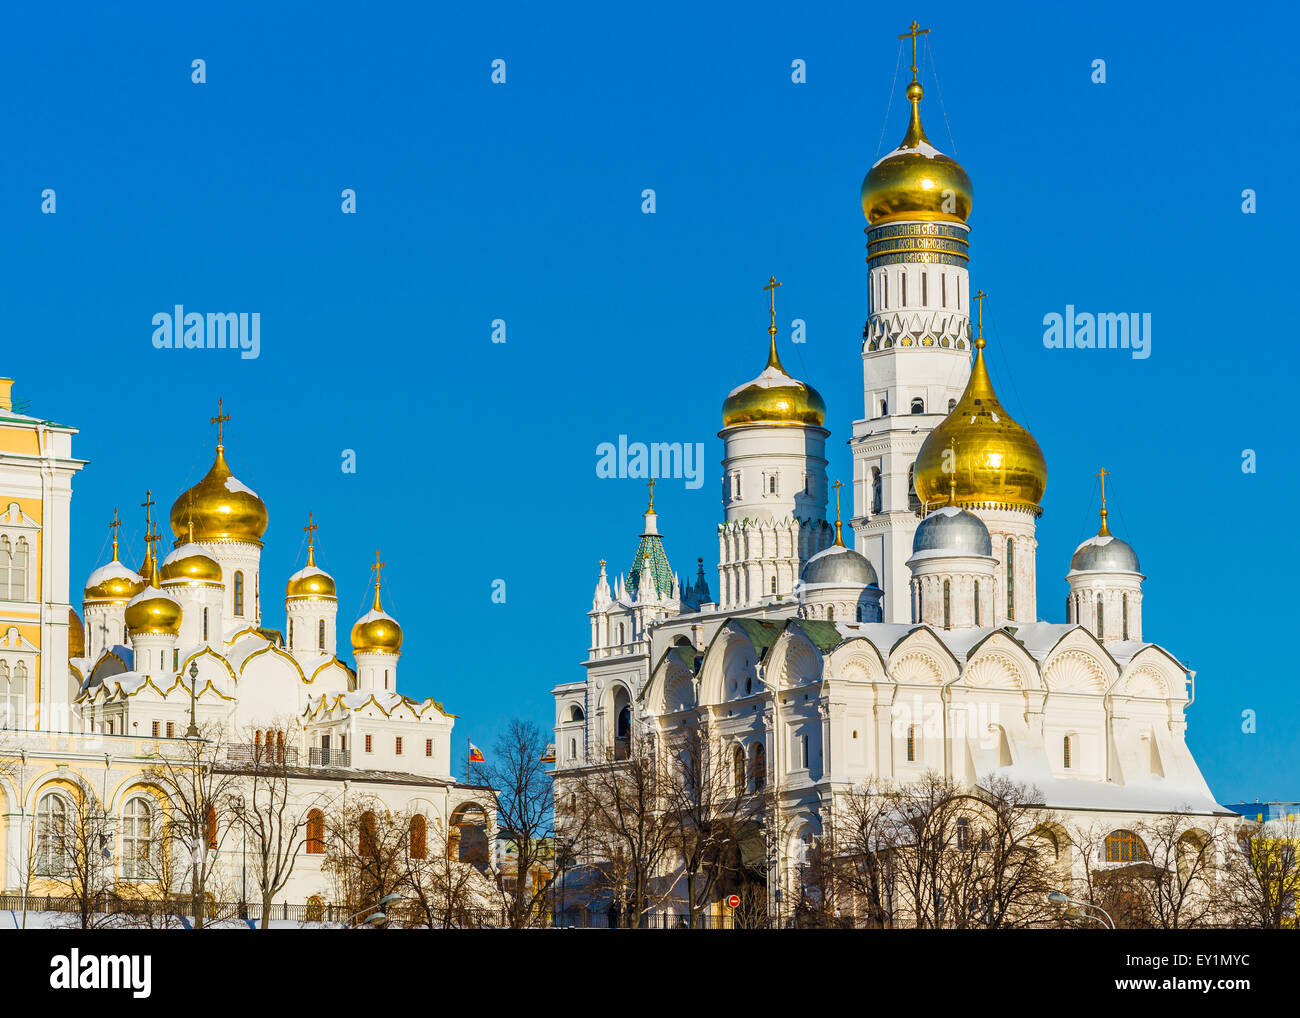 Annunciation and Archangel cathedrals of Moscow Kremlin and Ivan the Great bell tower in the winter day Stock Photo